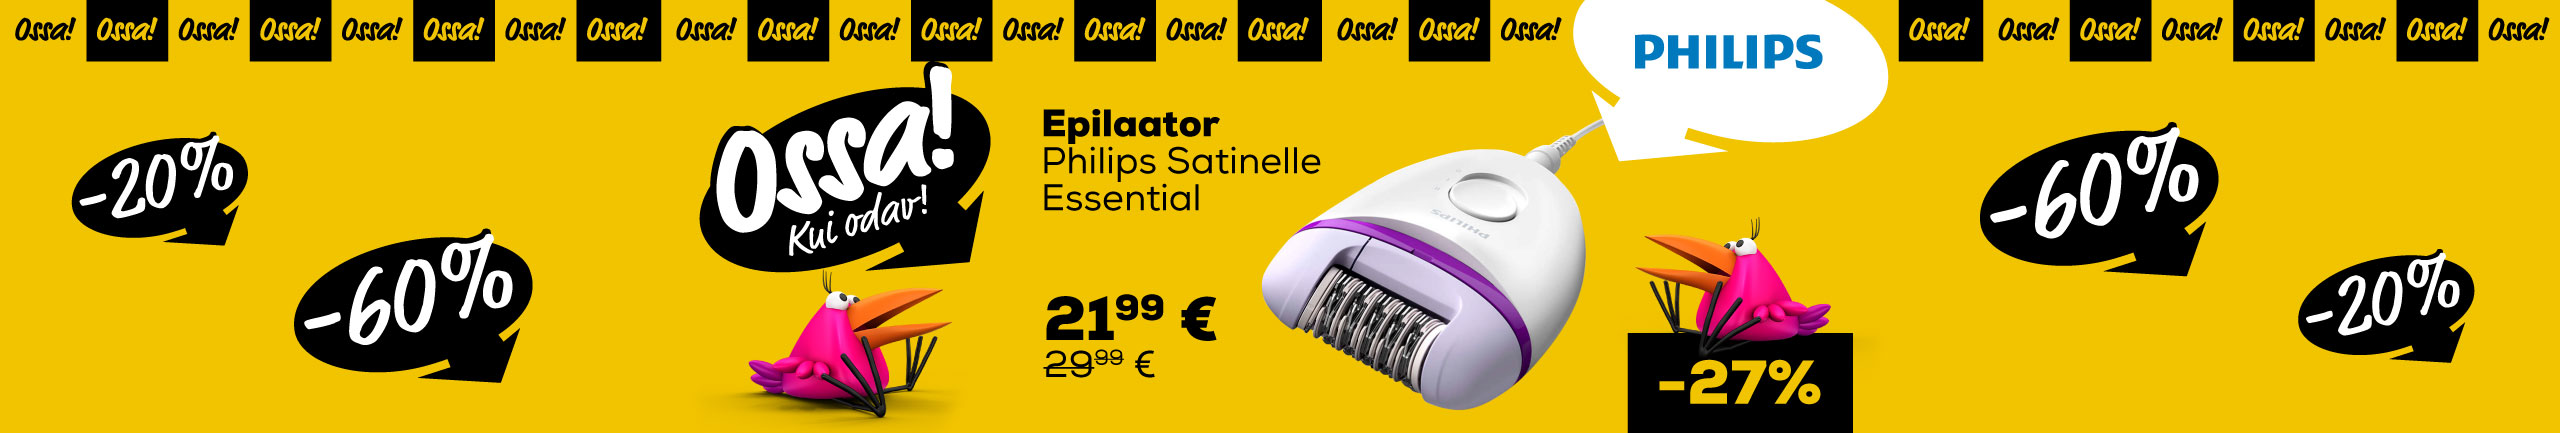 NPL Ossa extended! We added new products! Epilator Philips Satinelle Essential 